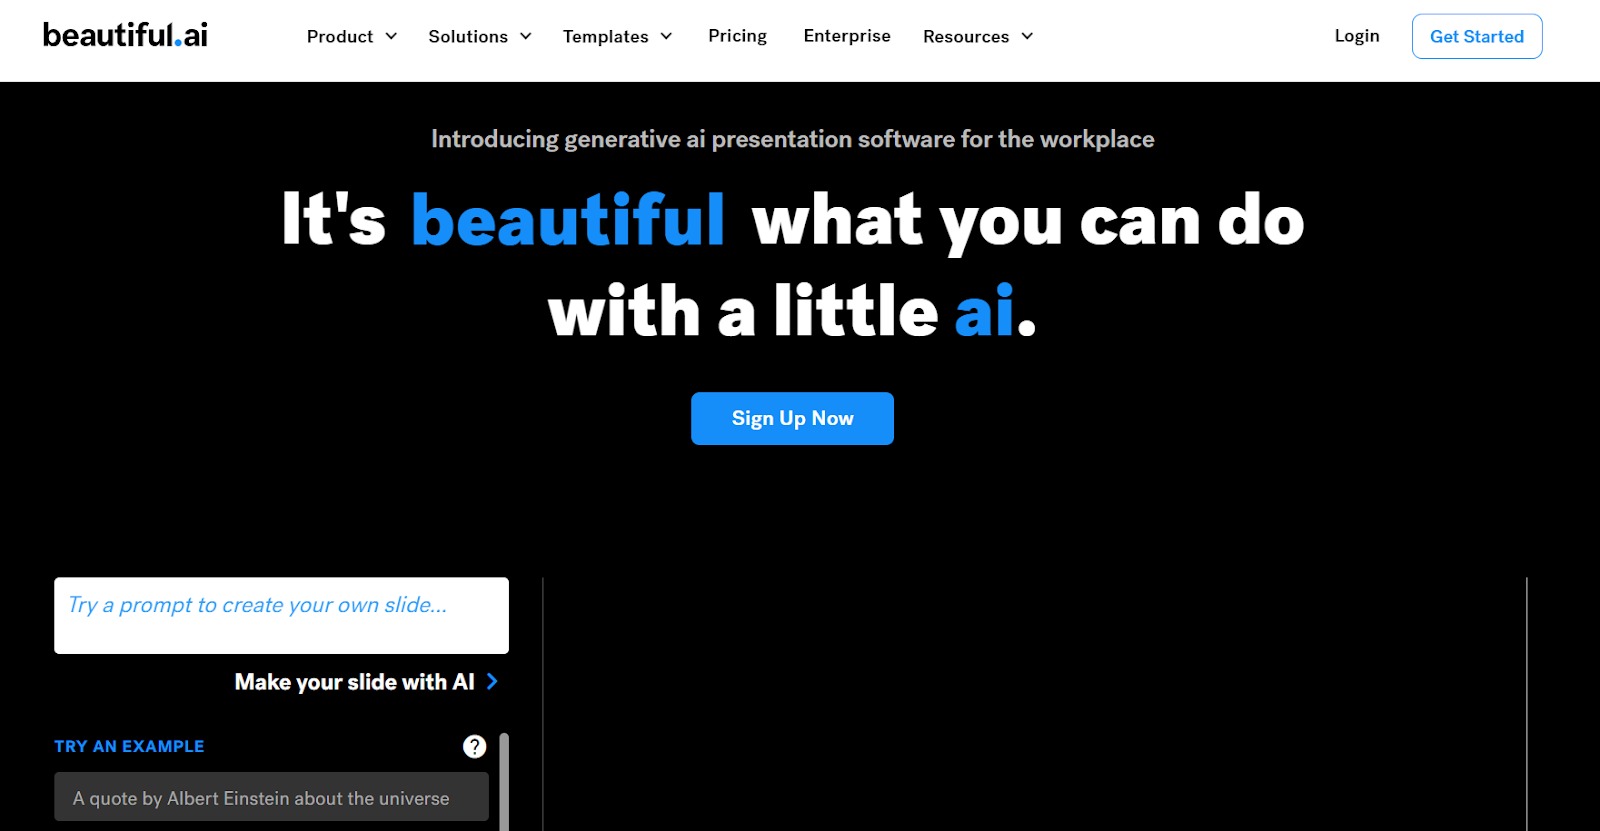 beautiful.ai website - it's beautiful what you can do with a little ai 